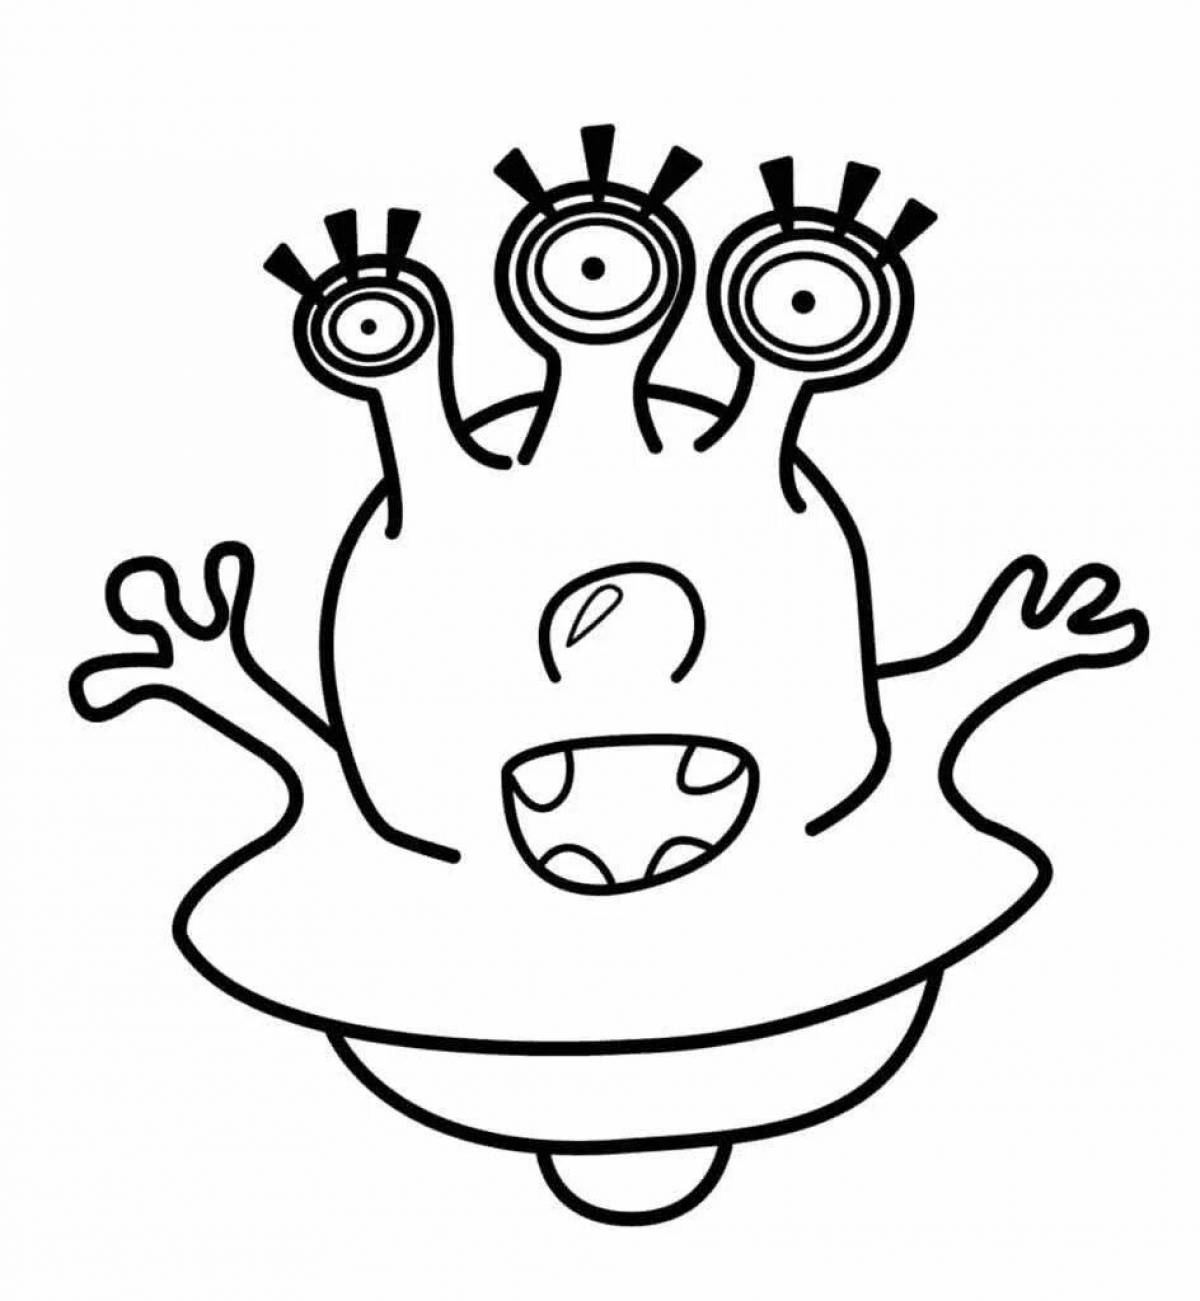 Crazy aliens coloring page for kids